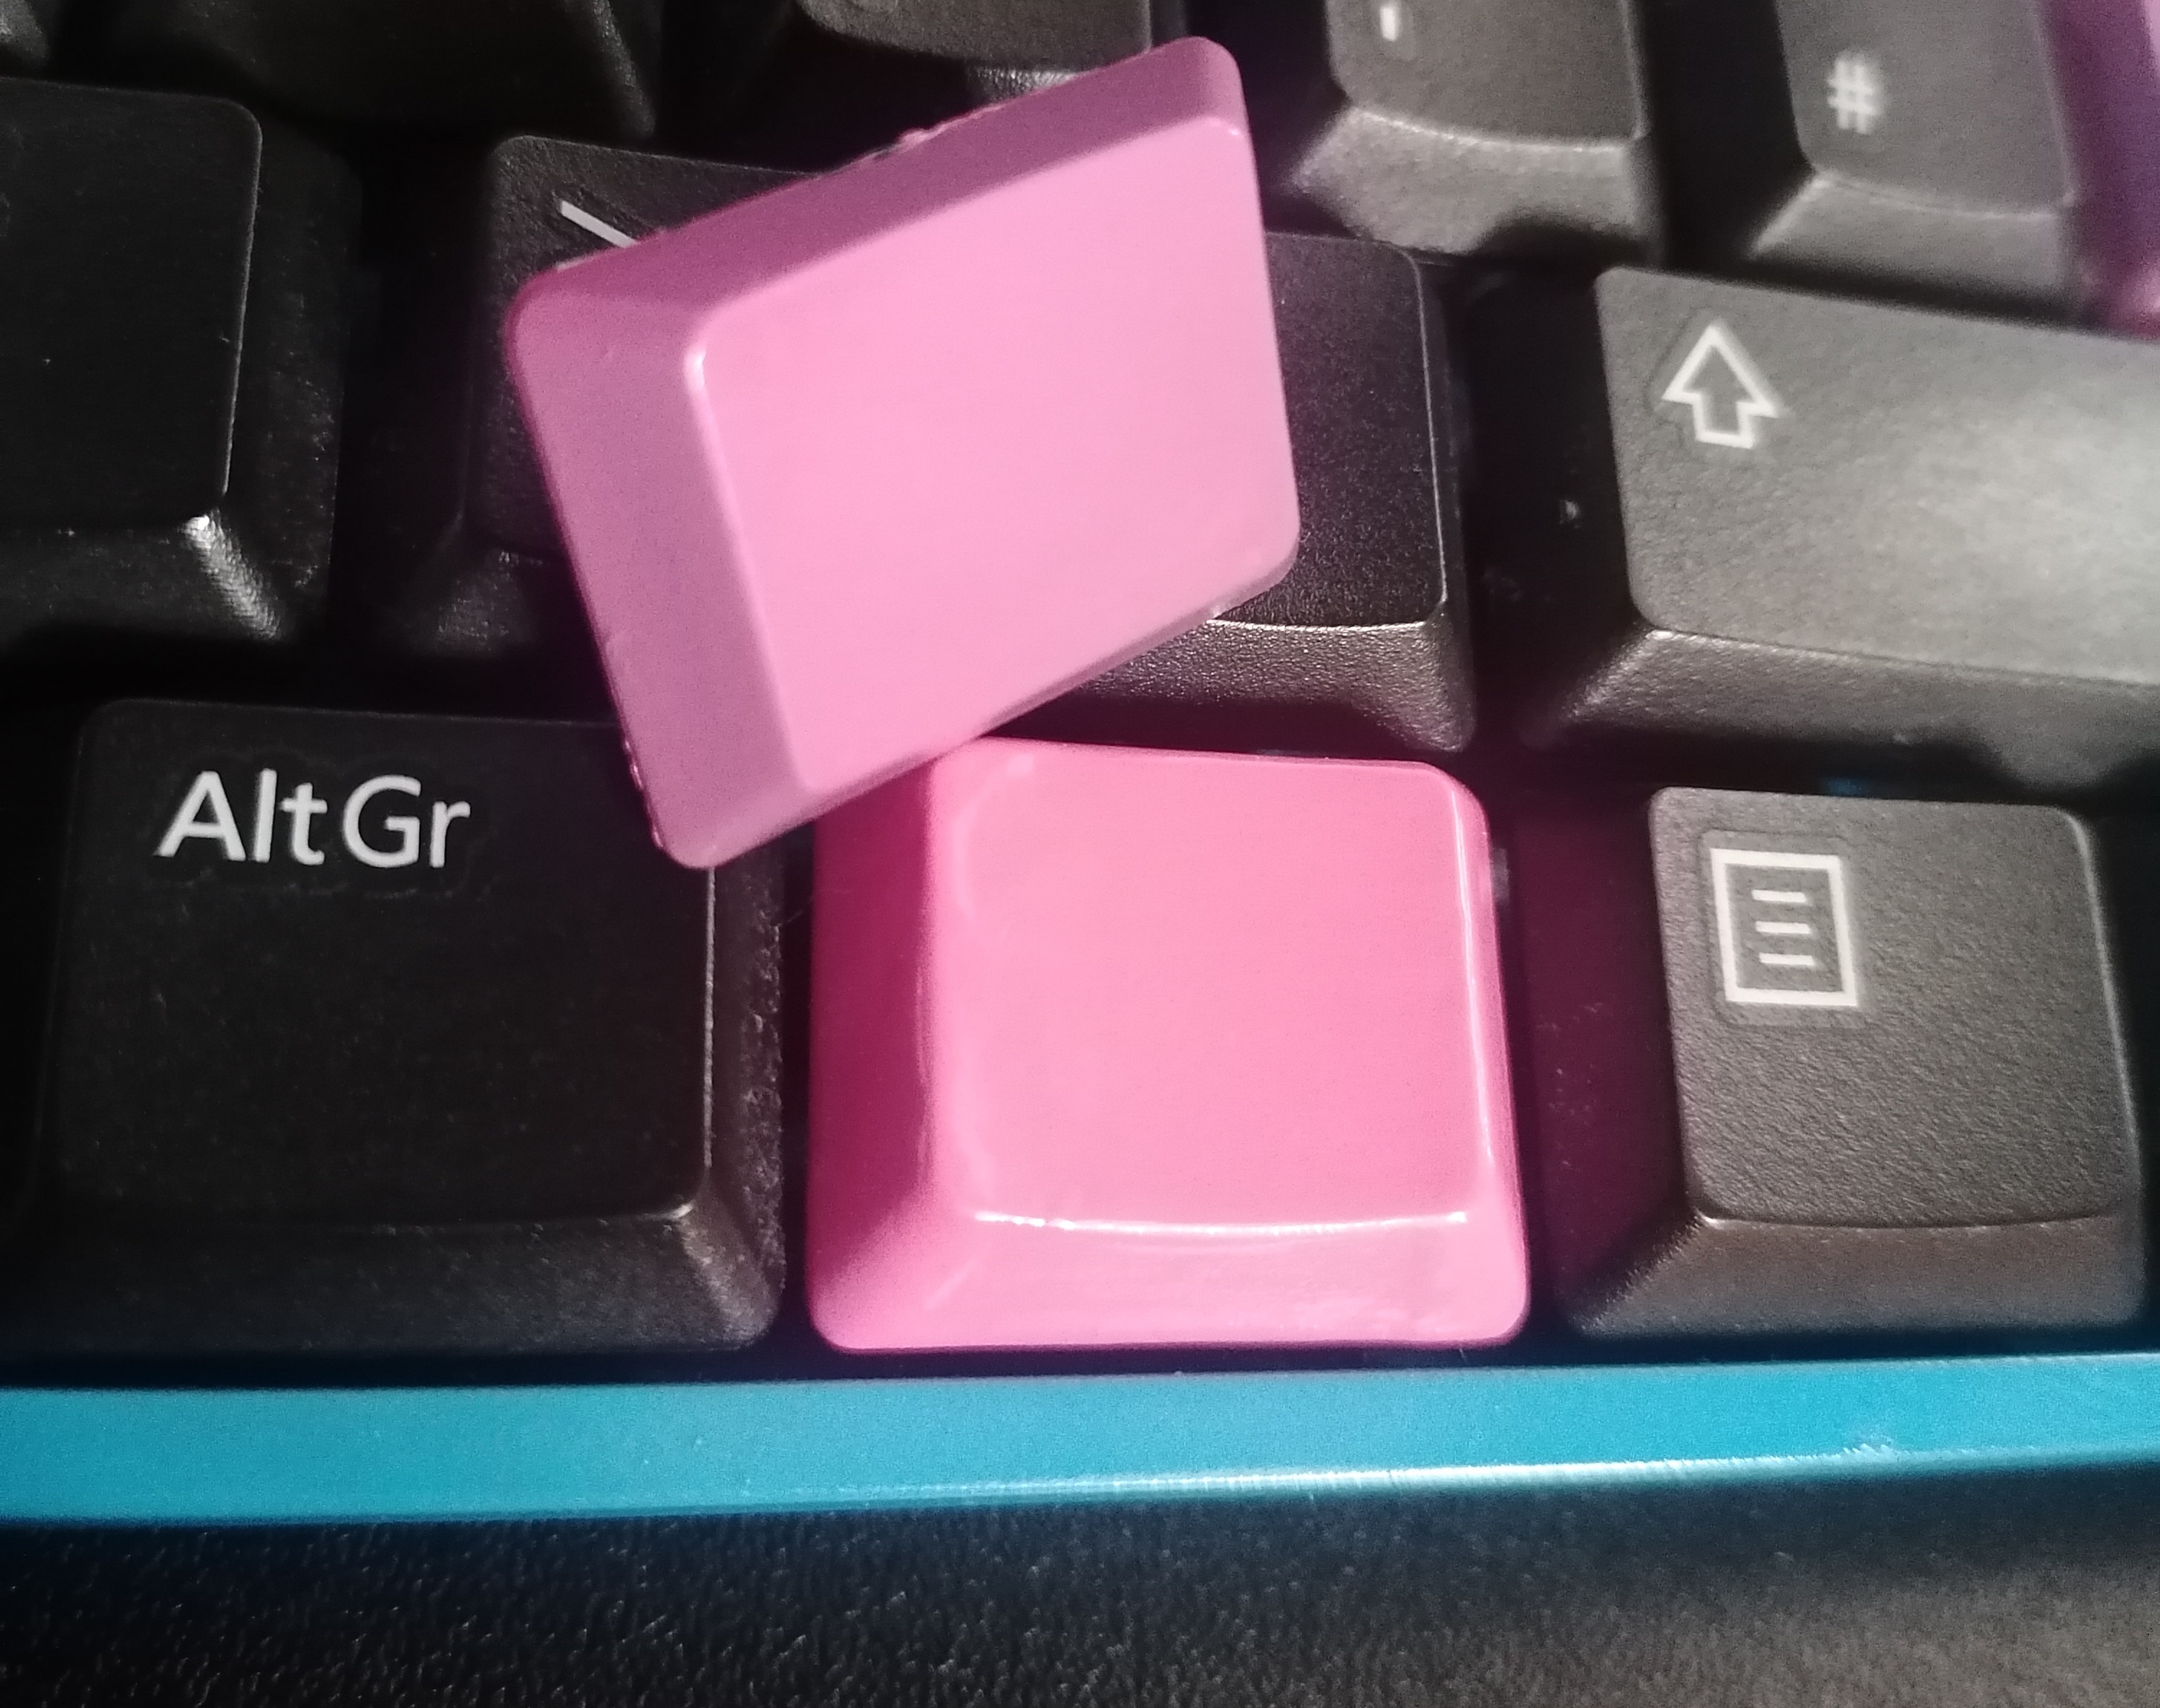 Two pink keys. One more vibrant with faint brushmarks is the varnish. 